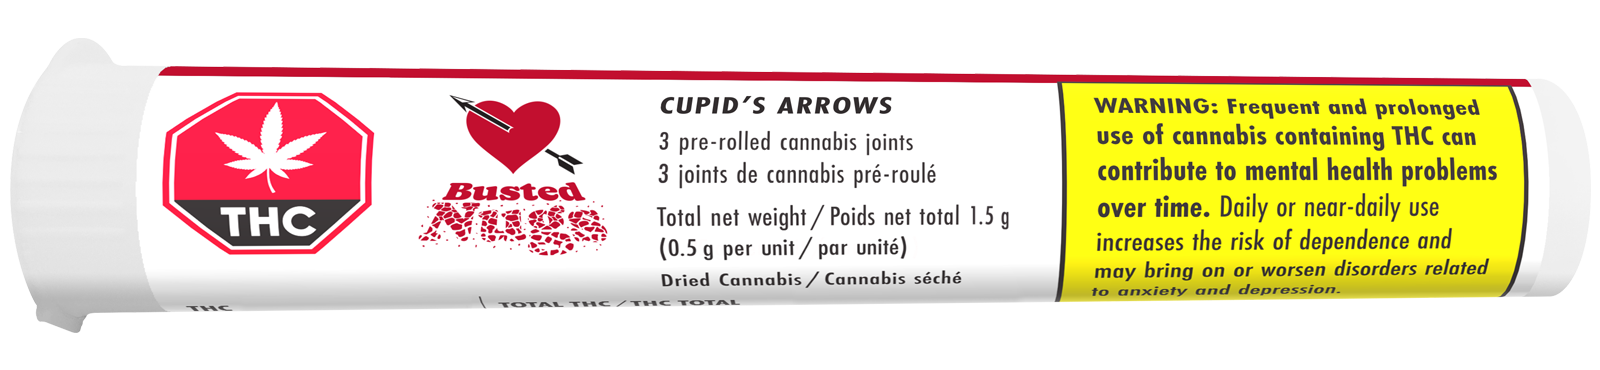 Busted Nugs - Pre-Rolled Cupid's Arrows